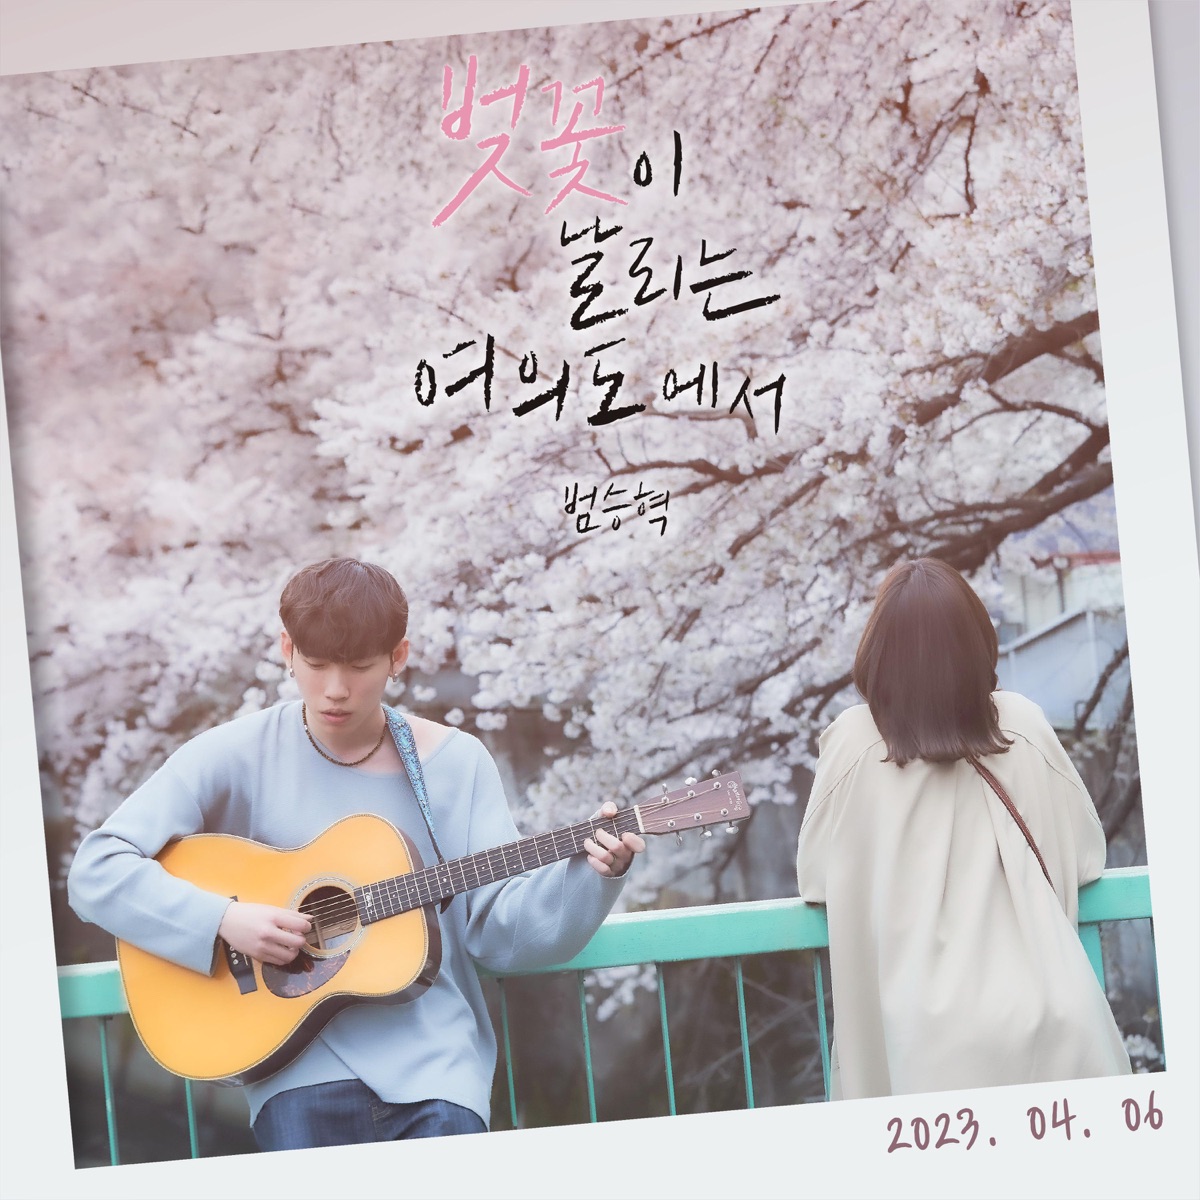 Beom seung hyuk – Cherry Blossoms Blooming In Yeouido – Single